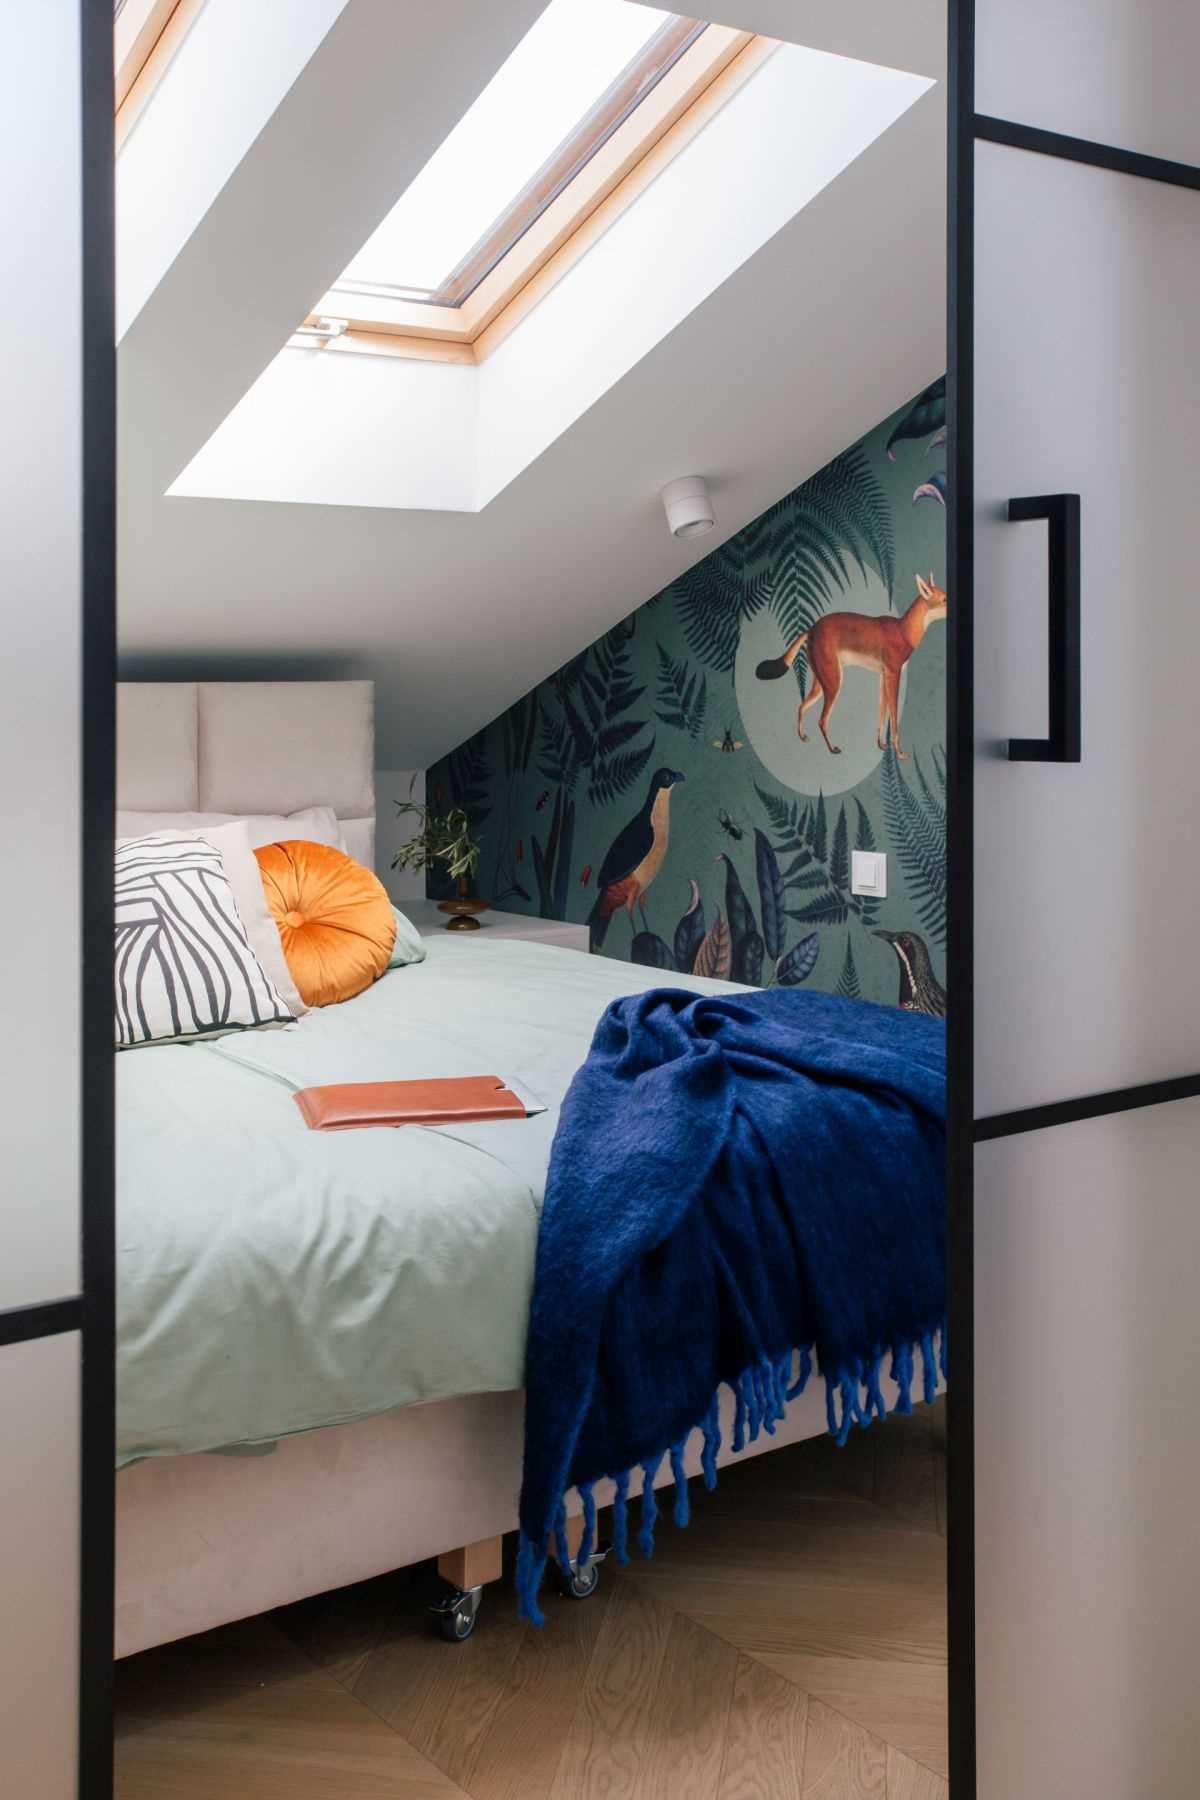 In this modern bedroom, there's multiple skylights and a wallpaper with botanicals, birds, and animals.